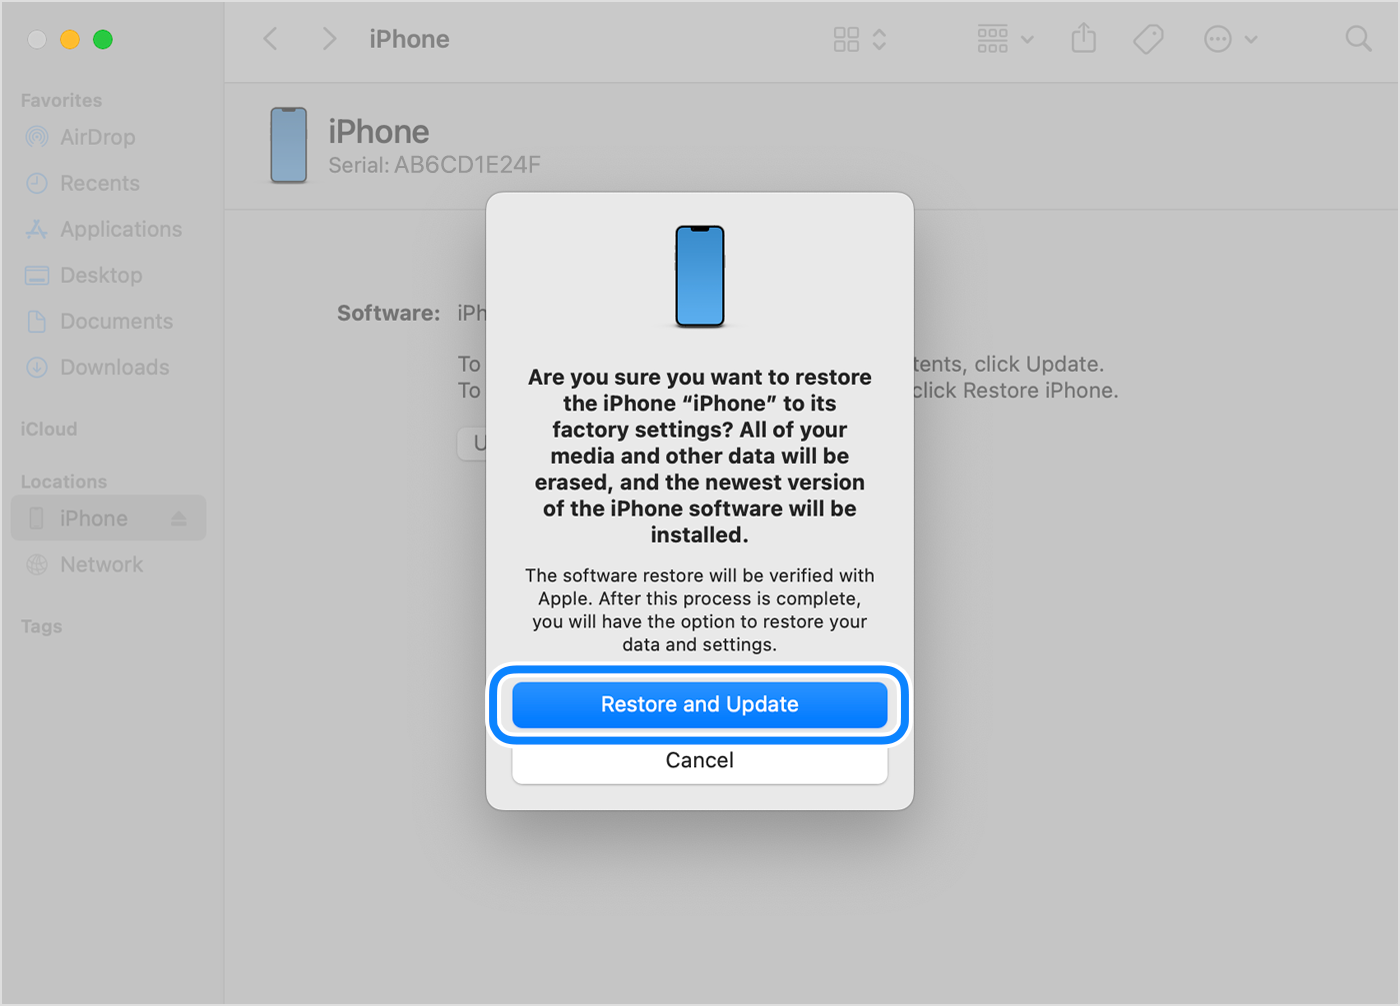 To restore and update your iPhone with your computer, you must tap Restore and Update to confirm.